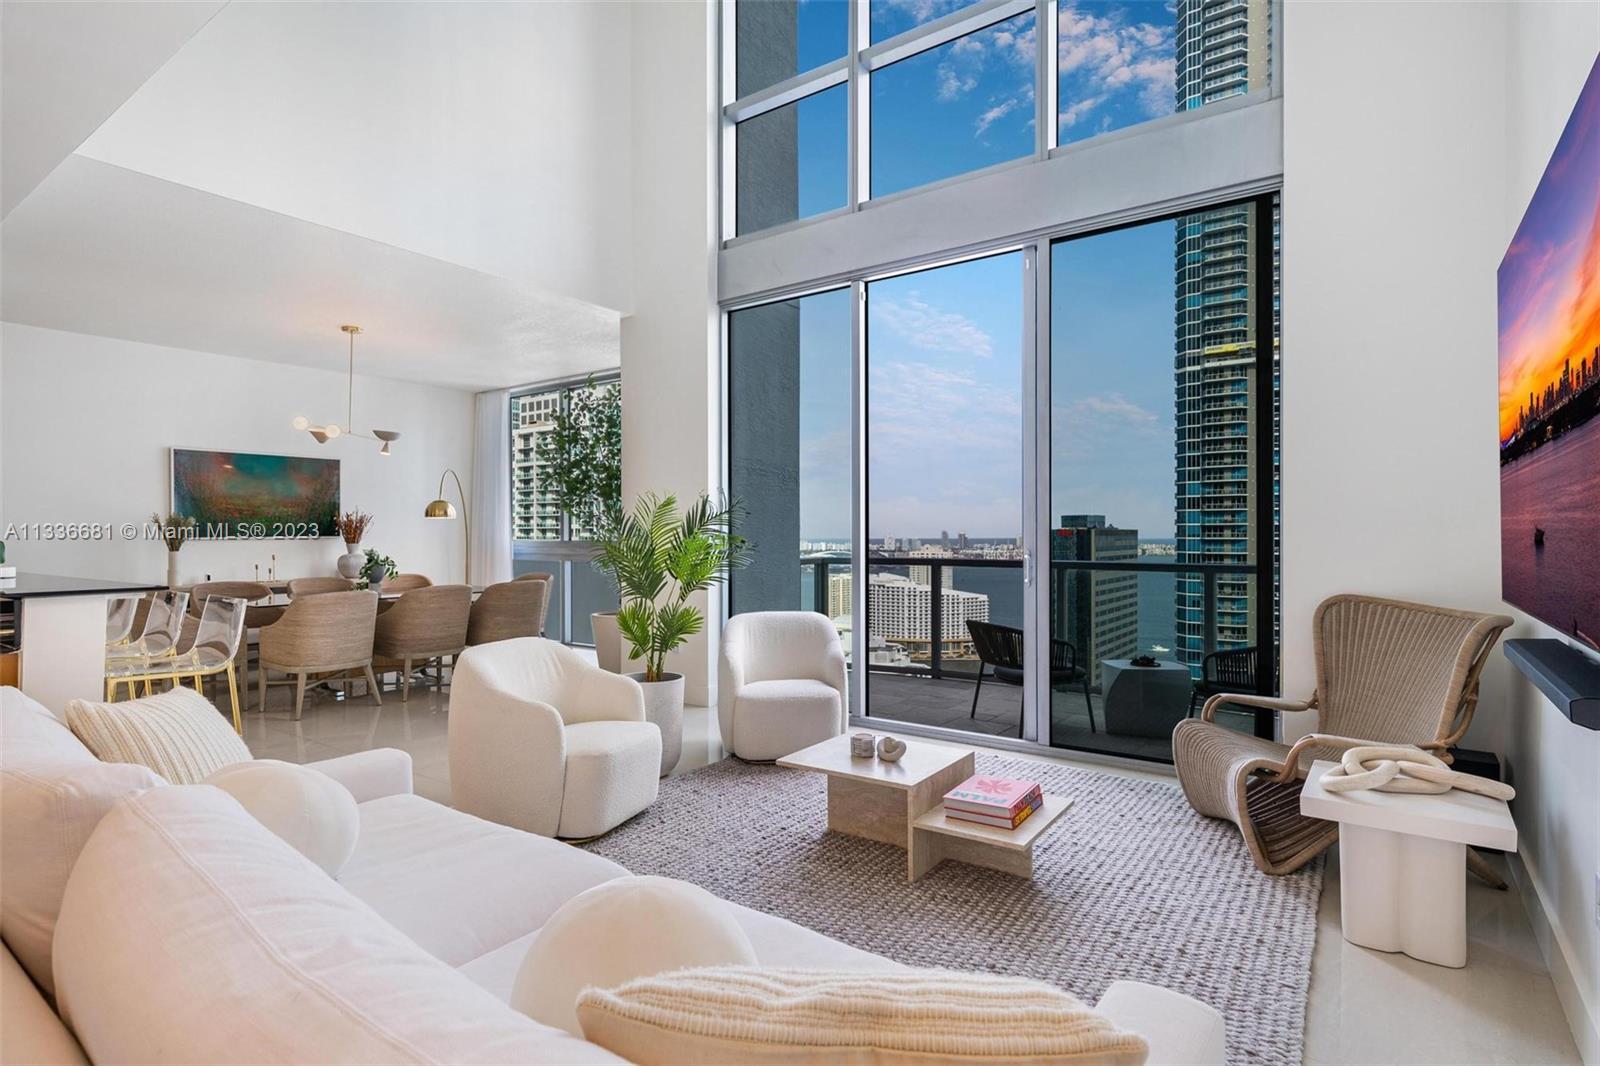 UNIQUE 2 story penthouse unit, right in the heart of Miami's Financial District, with spectacular views of Biscayne Bay, Brickell Skyline, and port of Miami. FULLY furnished "TURN KEY", with brand new high-end furnishings. Top of the line (Wolf, Miele) appliances, has built in Espresso coffee maker, and a wine cooler. Has two master Suites with King sized beds. The third bedroom has twin beds and additional rollaway bed and private bathroom. Tv's in every room as-well in living and dining room. Office with gorgeous views through the double high windows. Powder room/laundry room with sink and extra storage space. Walking distance from fine dining, shopping, and BBC. Amenities include fitness center, steam room, swimming pool, Jacuzzi, Golf Simulator, wine and cigar room, and party room.